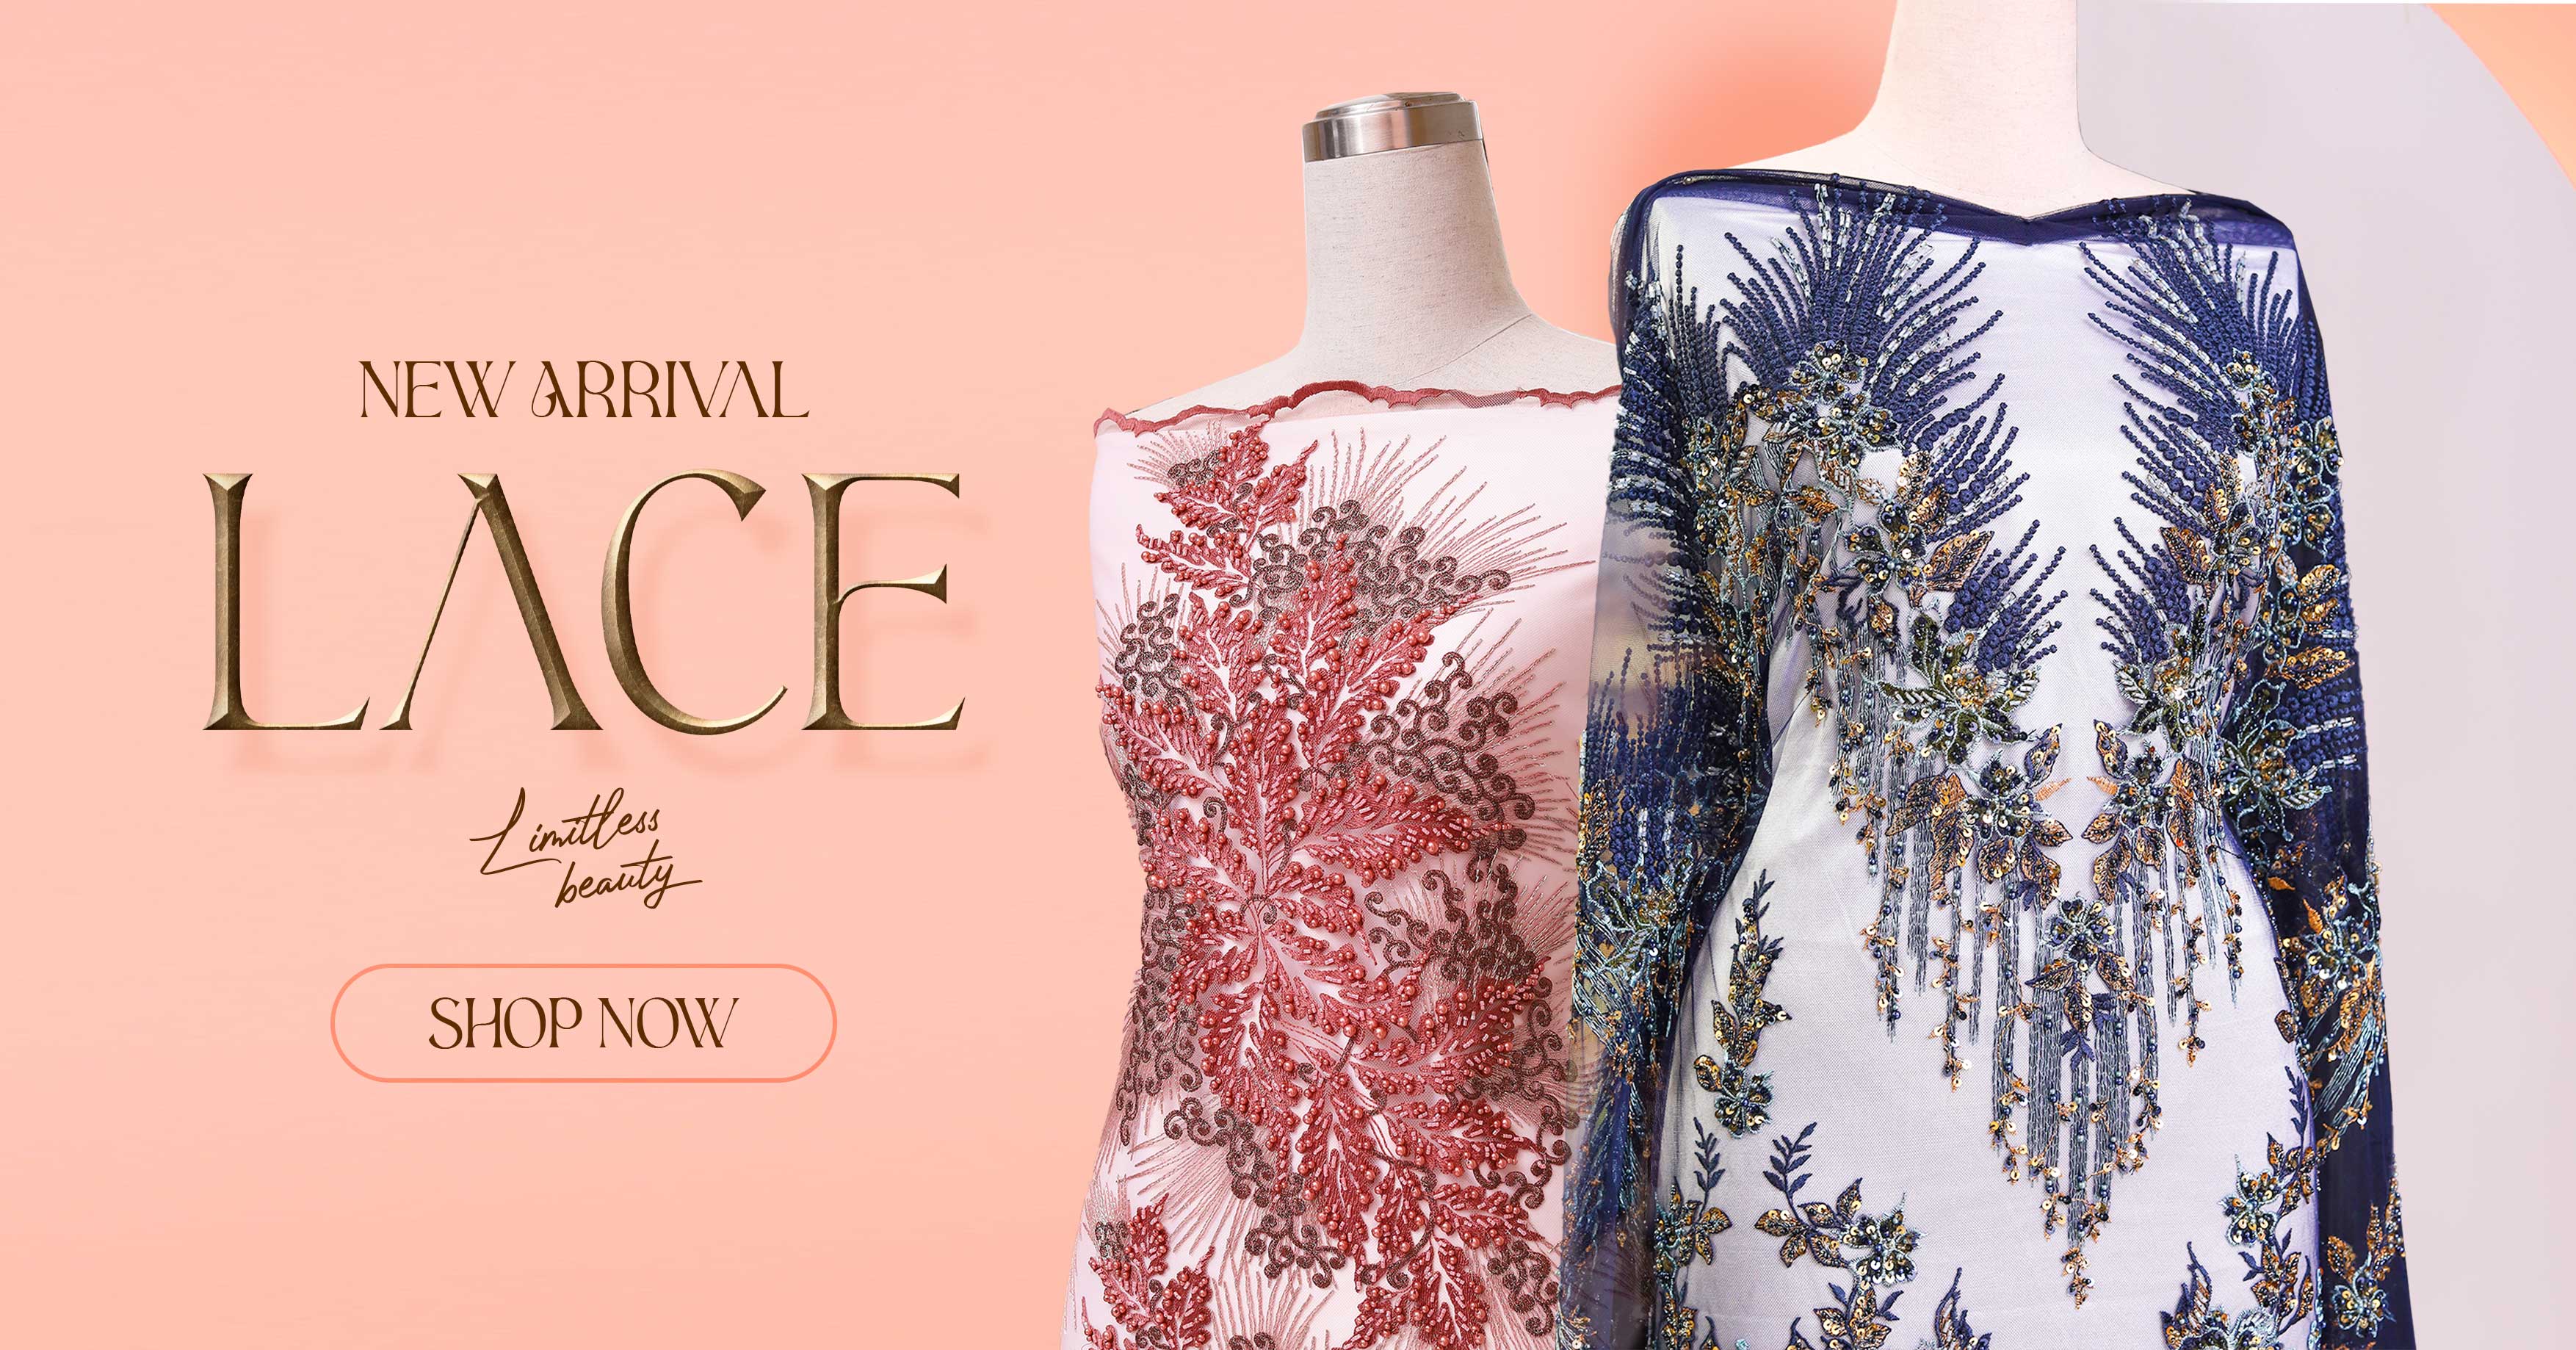 NEW ARRIVAL LACE